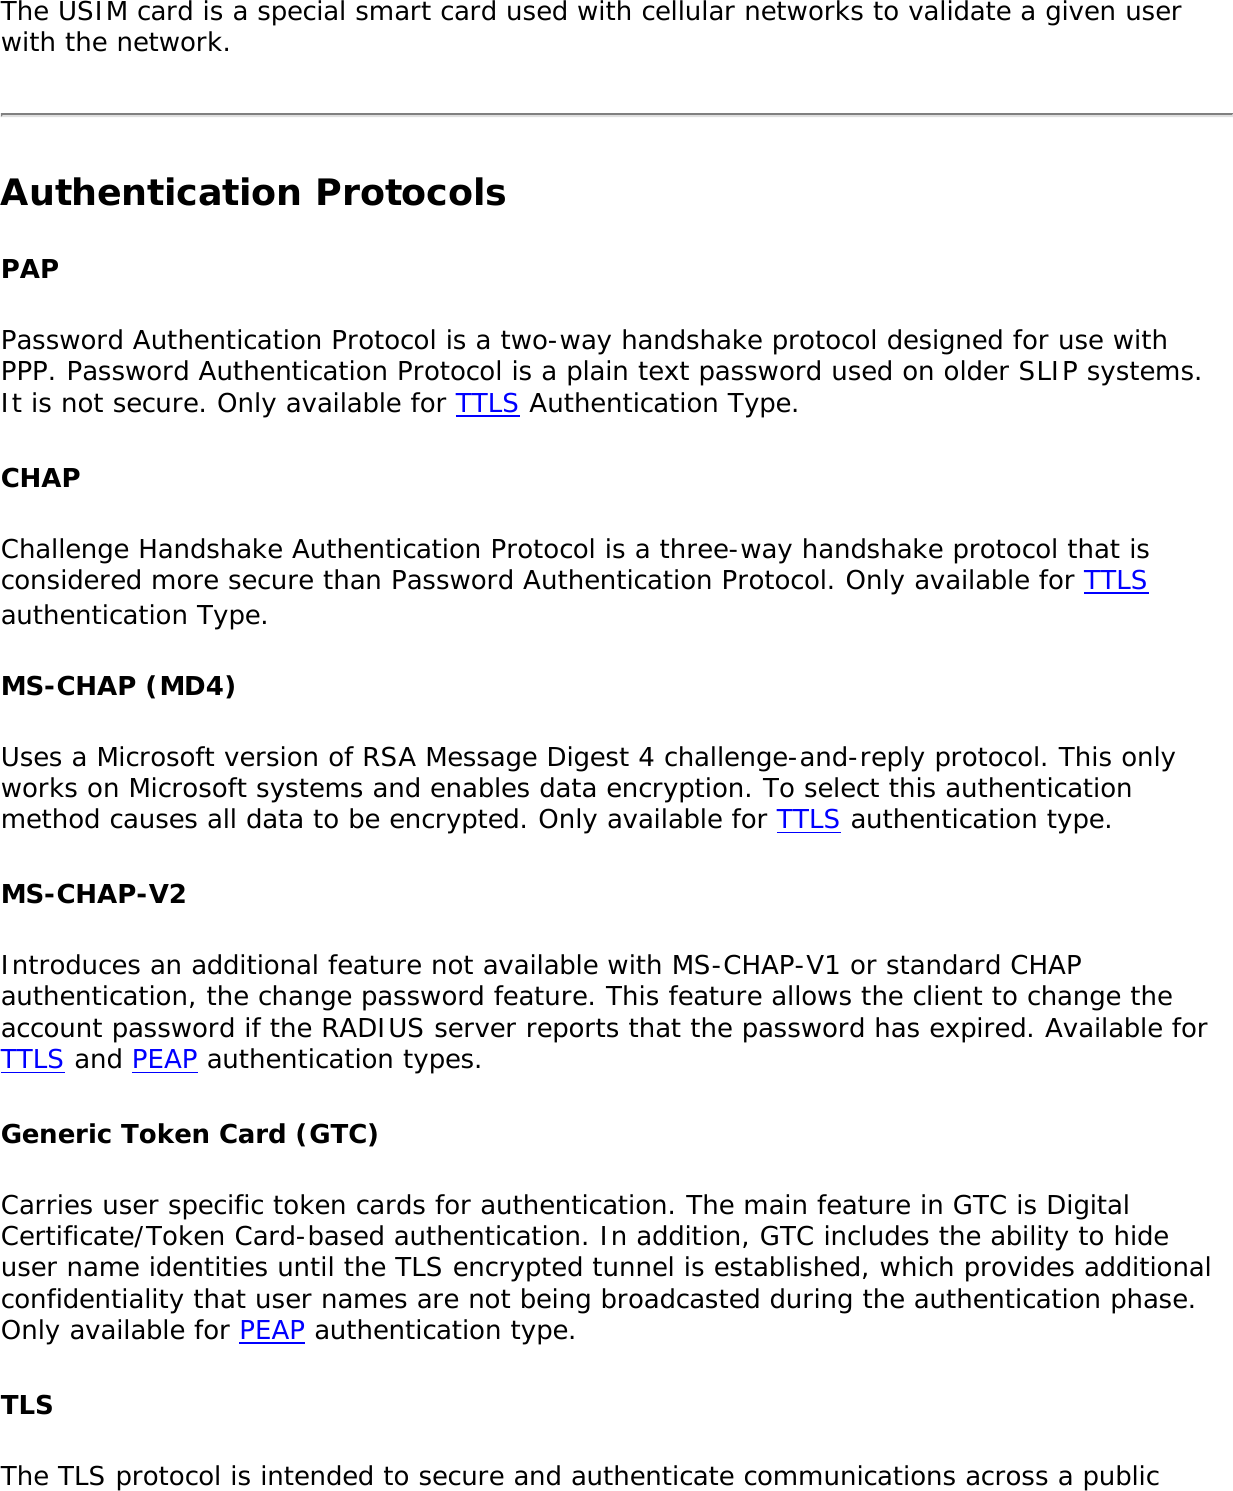 The USIM card is a special smart card used with cellular networks to validate a given user with the network.Authentication ProtocolsPAPPassword Authentication Protocol is a two-way handshake protocol designed for use with PPP. Password Authentication Protocol is a plain text password used on older SLIP systems. It is not secure. Only available for TTLS Authentication Type. CHAP Challenge Handshake Authentication Protocol is a three-way handshake protocol that is considered more secure than Password Authentication Protocol. Only available for TTLS authentication Type. MS-CHAP (MD4)Uses a Microsoft version of RSA Message Digest 4 challenge-and-reply protocol. This only works on Microsoft systems and enables data encryption. To select this authentication method causes all data to be encrypted. Only available for TTLS authentication type. MS-CHAP-V2 Introduces an additional feature not available with MS-CHAP-V1 or standard CHAP authentication, the change password feature. This feature allows the client to change the account password if the RADIUS server reports that the password has expired. Available for TTLS and PEAP authentication types. Generic Token Card (GTC) Carries user specific token cards for authentication. The main feature in GTC is Digital Certificate/Token Card-based authentication. In addition, GTC includes the ability to hide user name identities until the TLS encrypted tunnel is established, which provides additional confidentiality that user names are not being broadcasted during the authentication phase. Only available for PEAP authentication type. TLSThe TLS protocol is intended to secure and authenticate communications across a public 